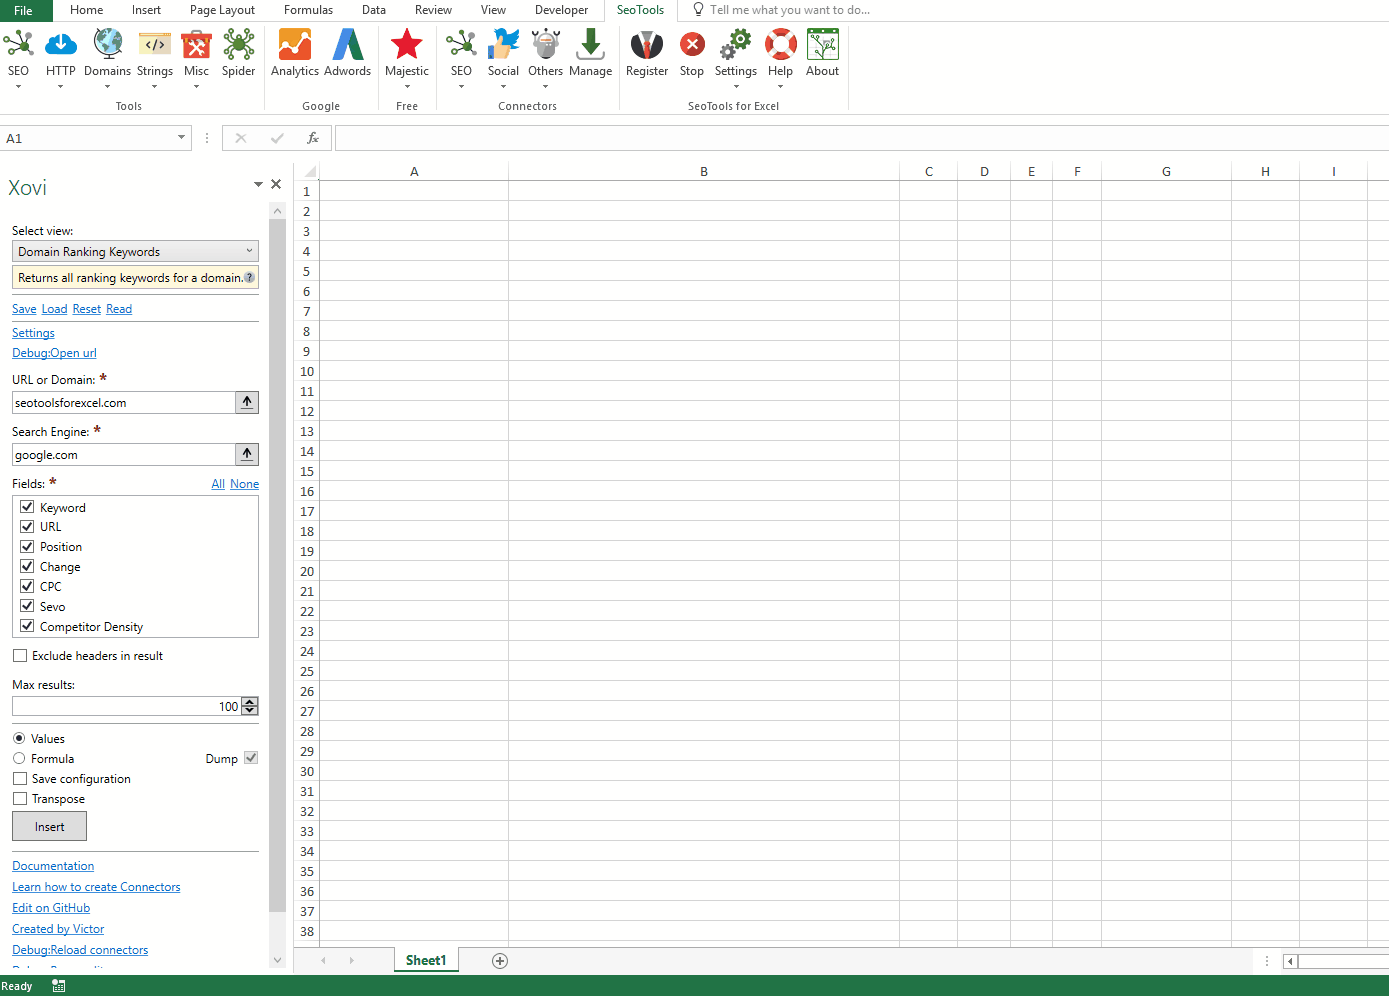 Data results output in Excel